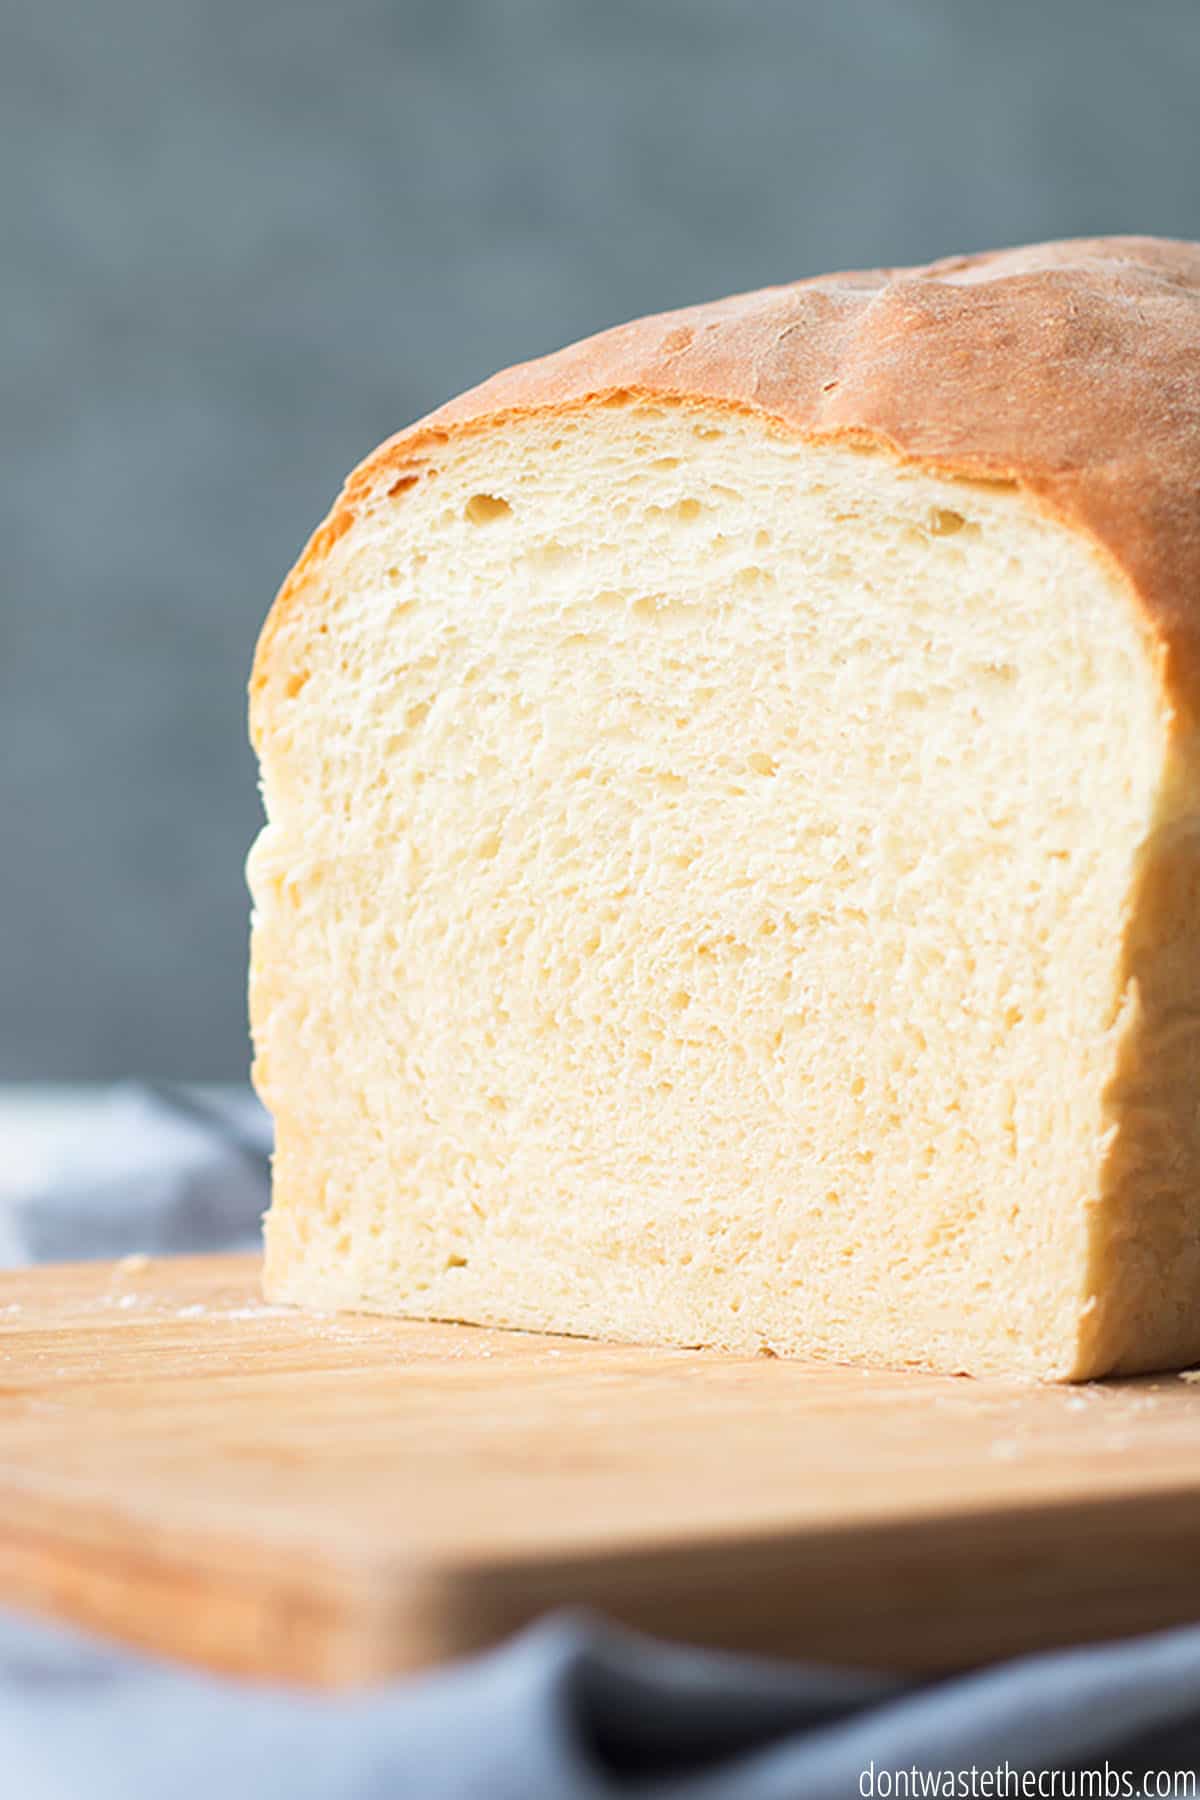 A whole loaf of homemade bread sliced to show the fluffy white interior.